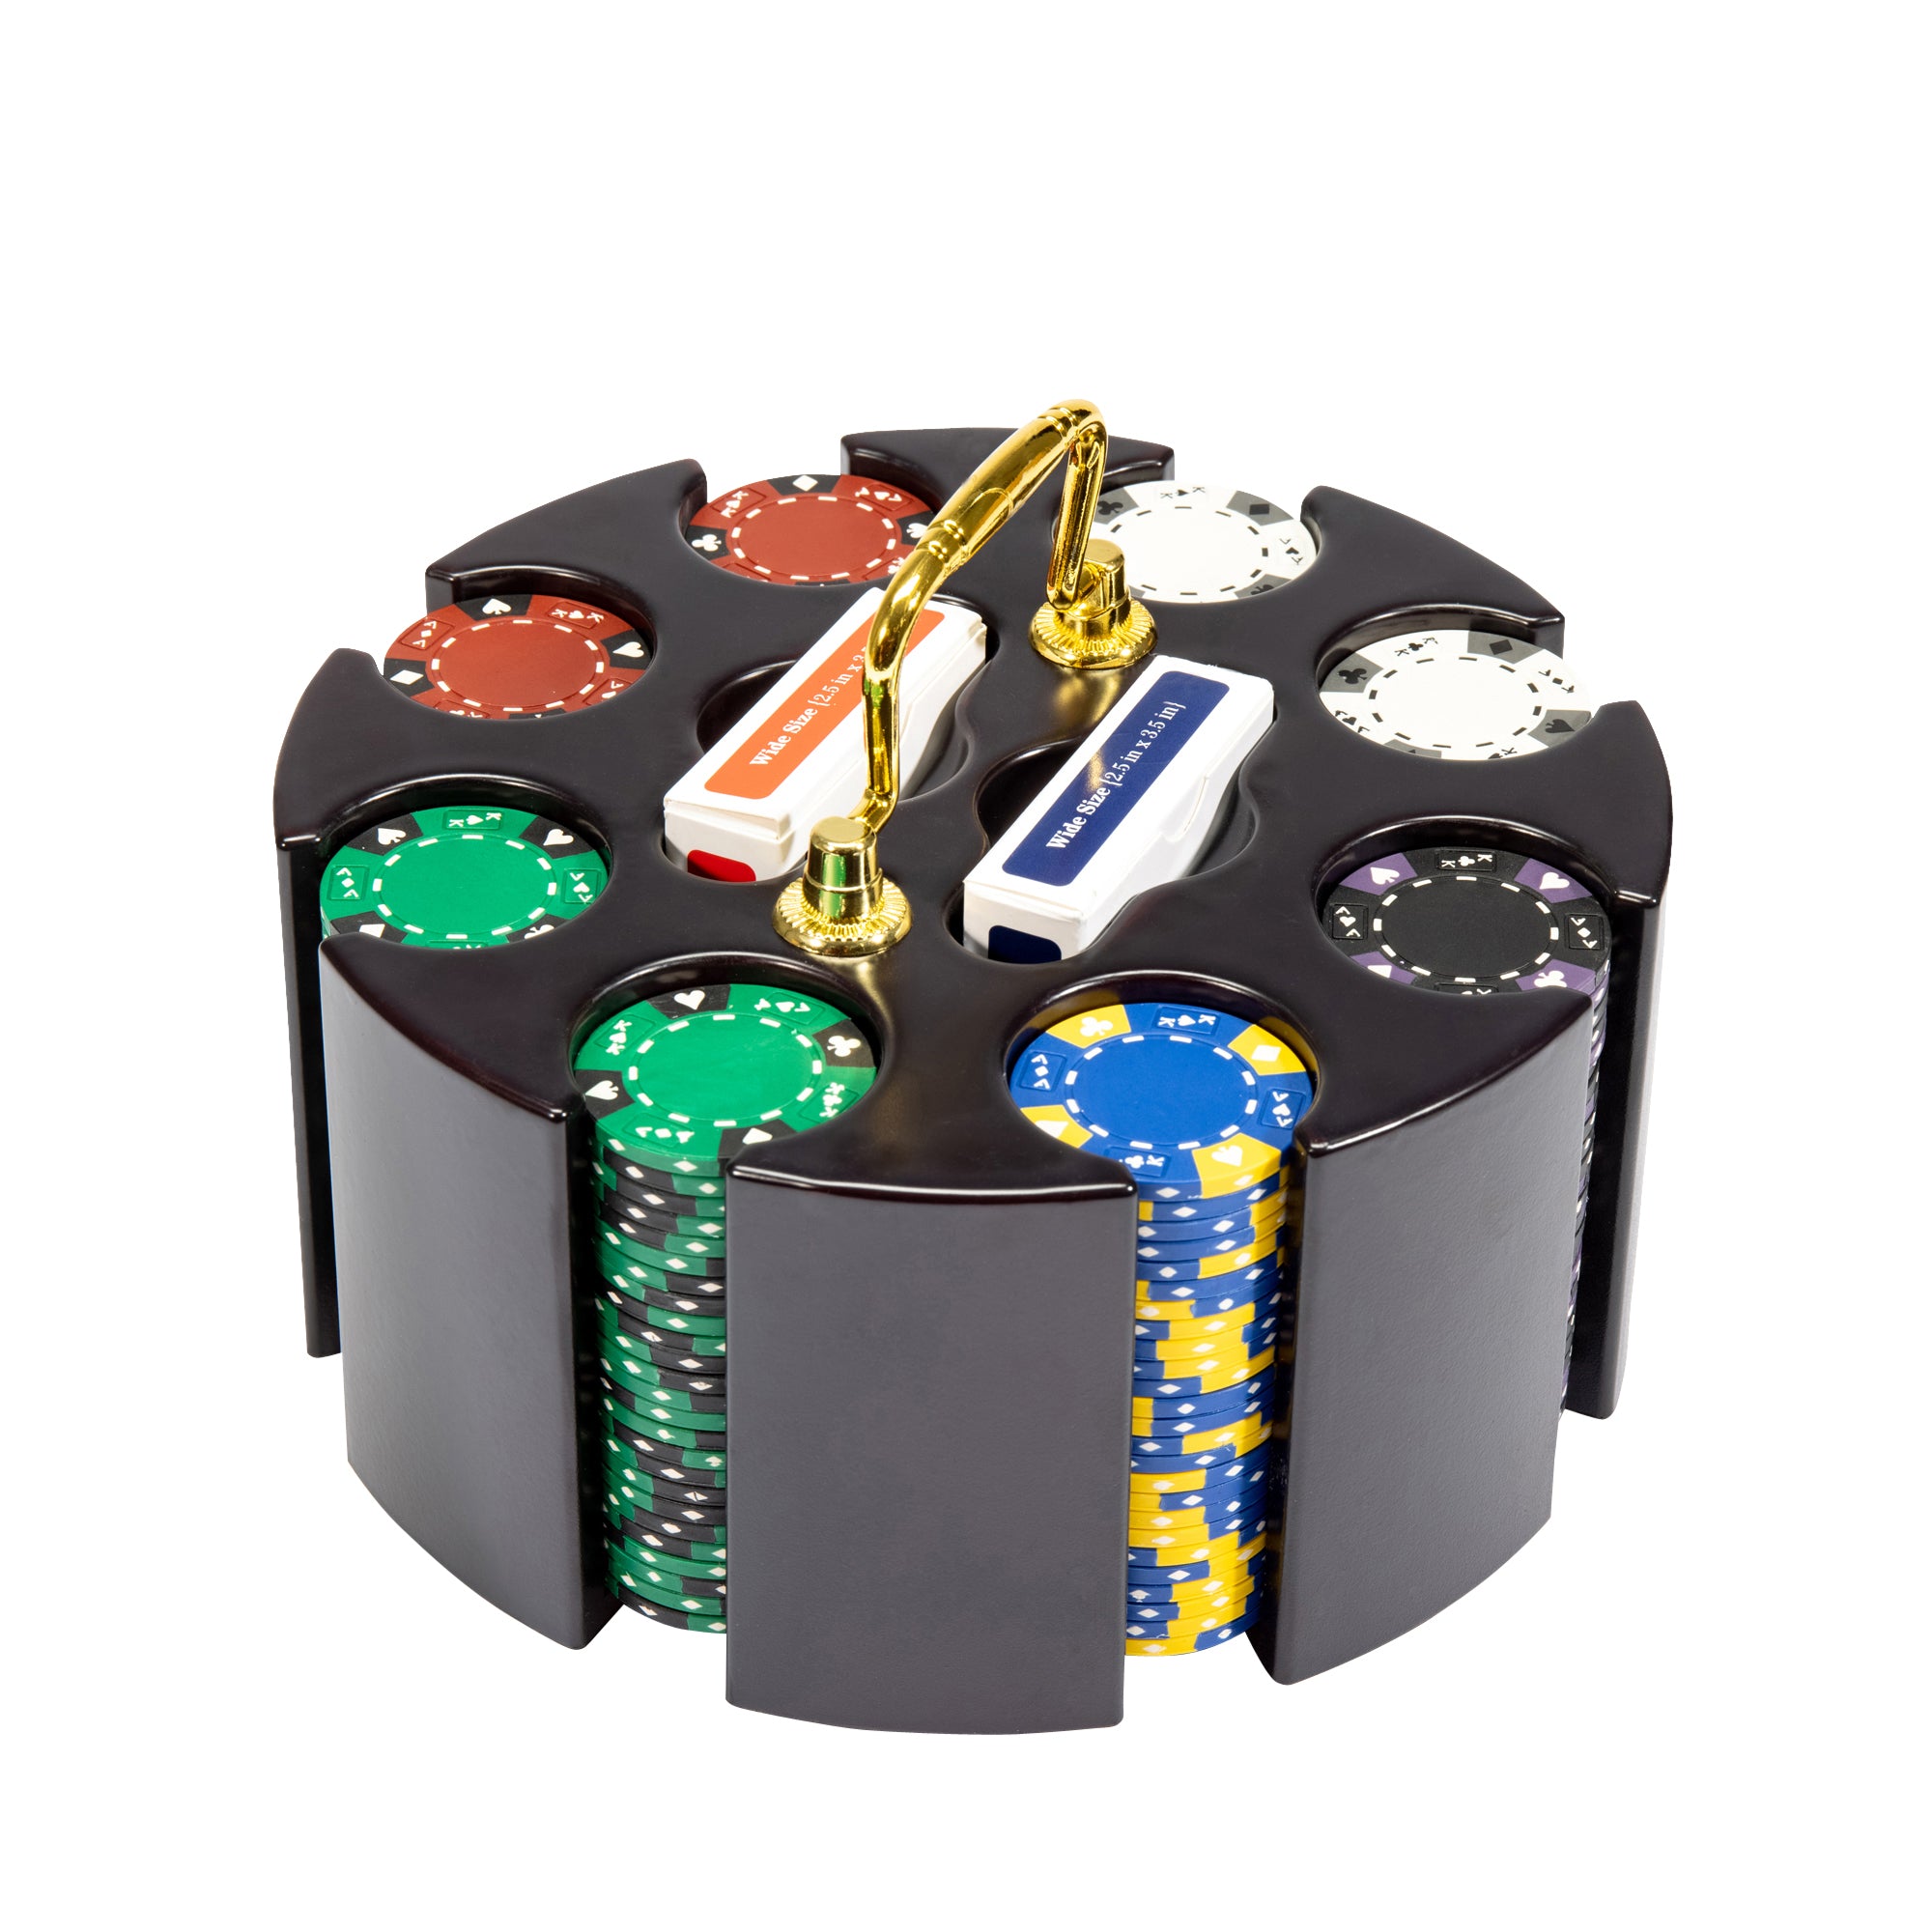 Ace King 14-gram Poker Chip Set in Wood Carousel (200 Count)